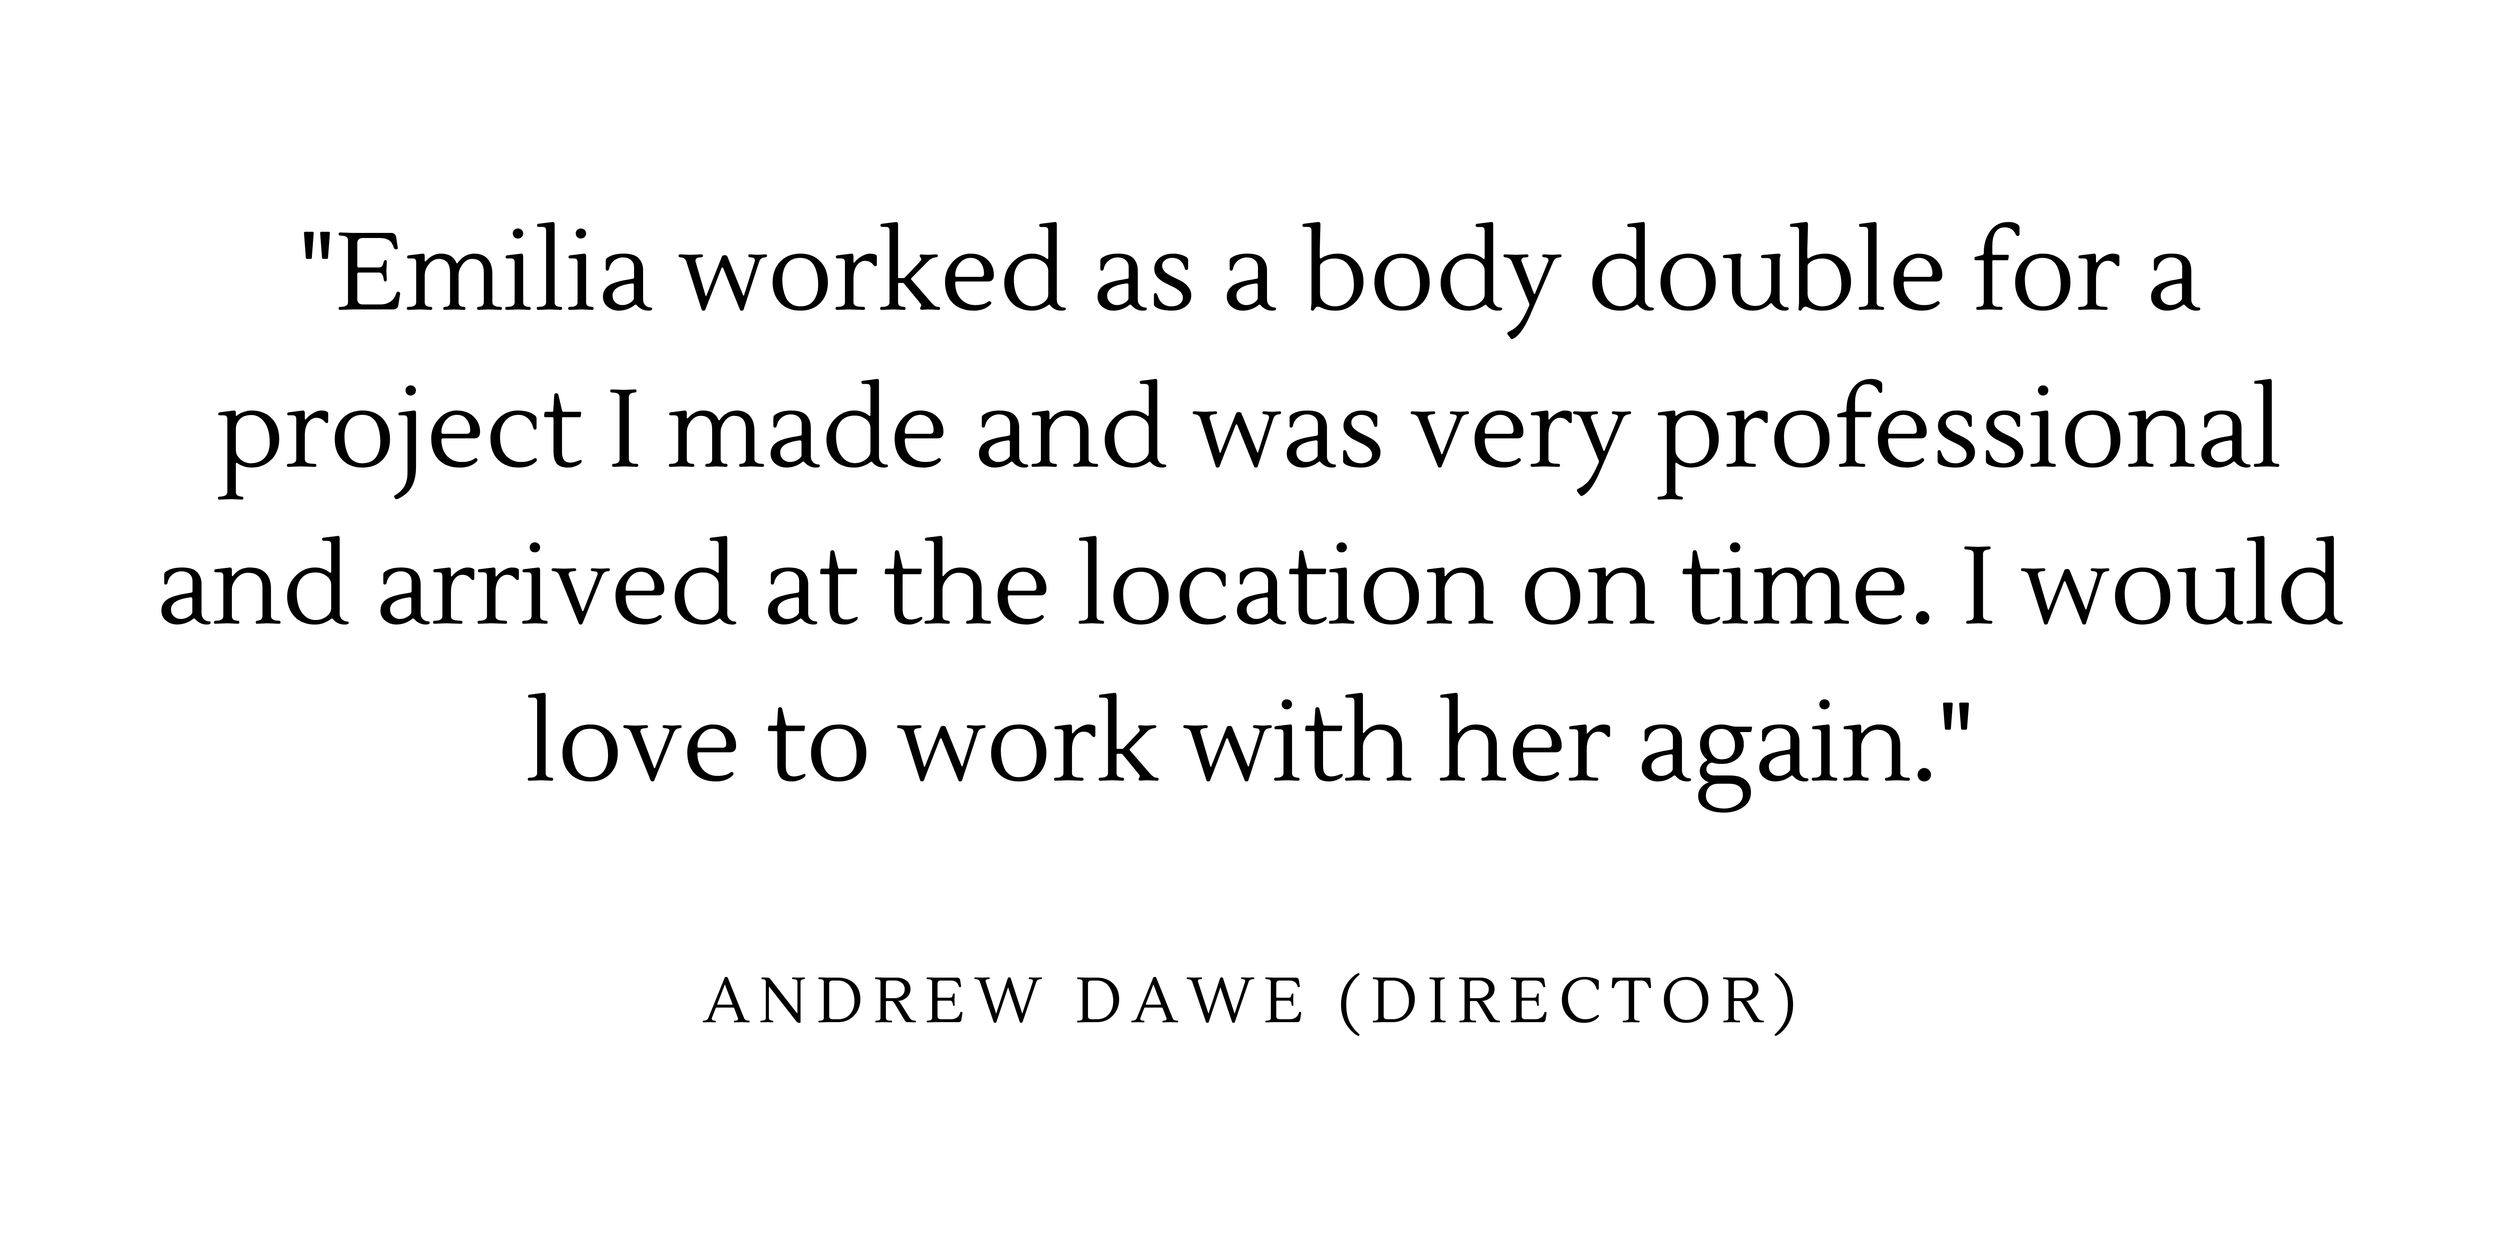  "Emilia worked as a body double for a project I made and was very professional and arrived at the location on time. I would love to work with her again." - Andrew Dawe (Director) 